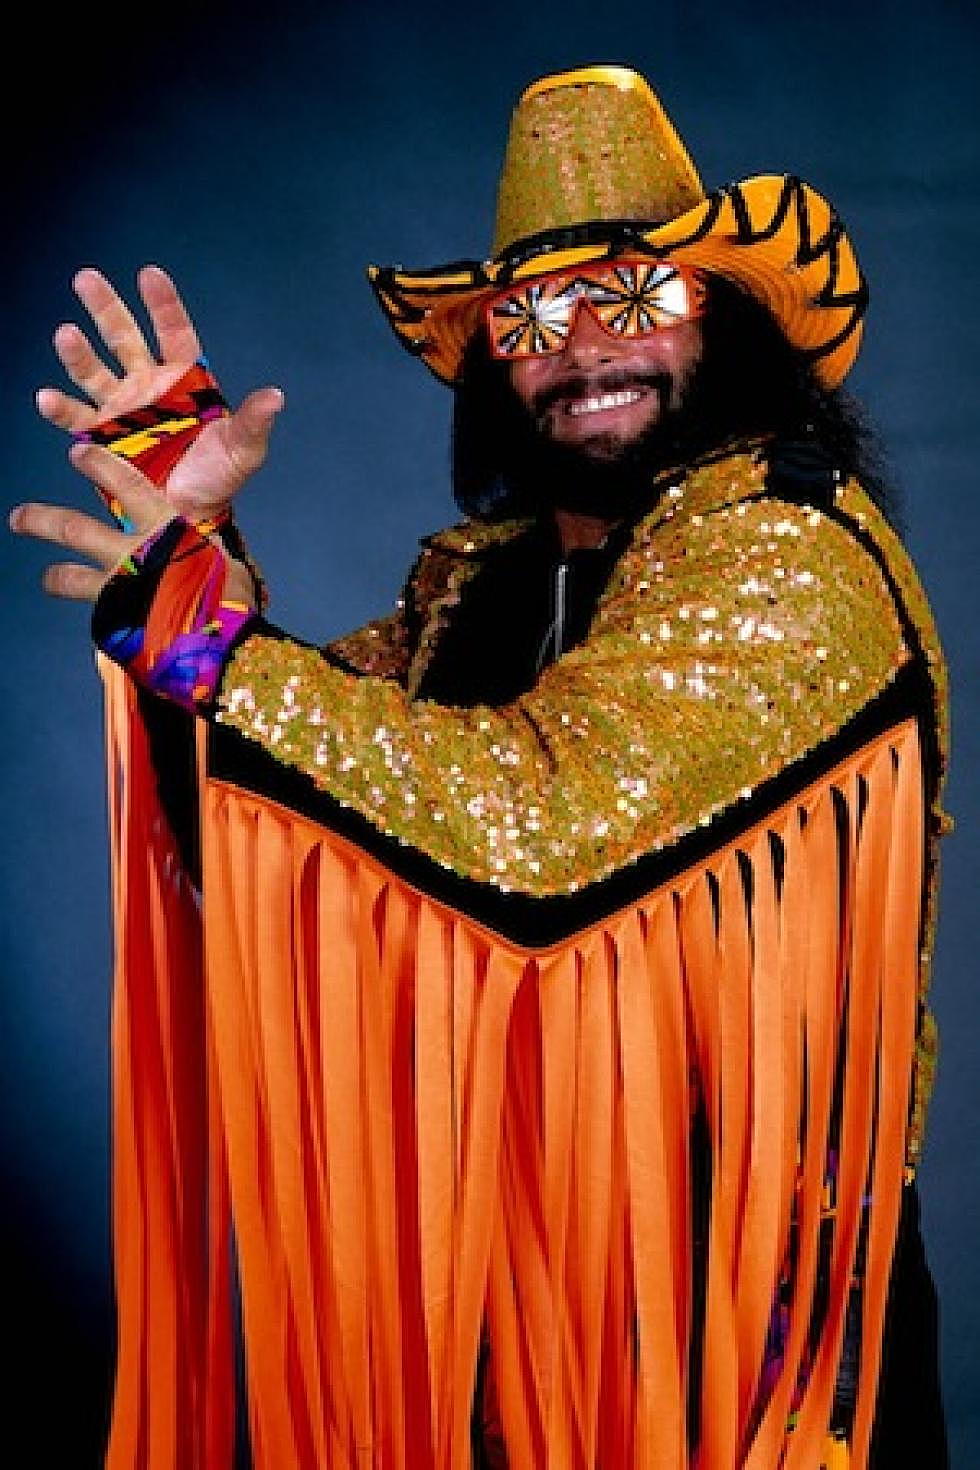 Sign the Petition to Make May 20th ‘National Macho Man Randy Savage Day’